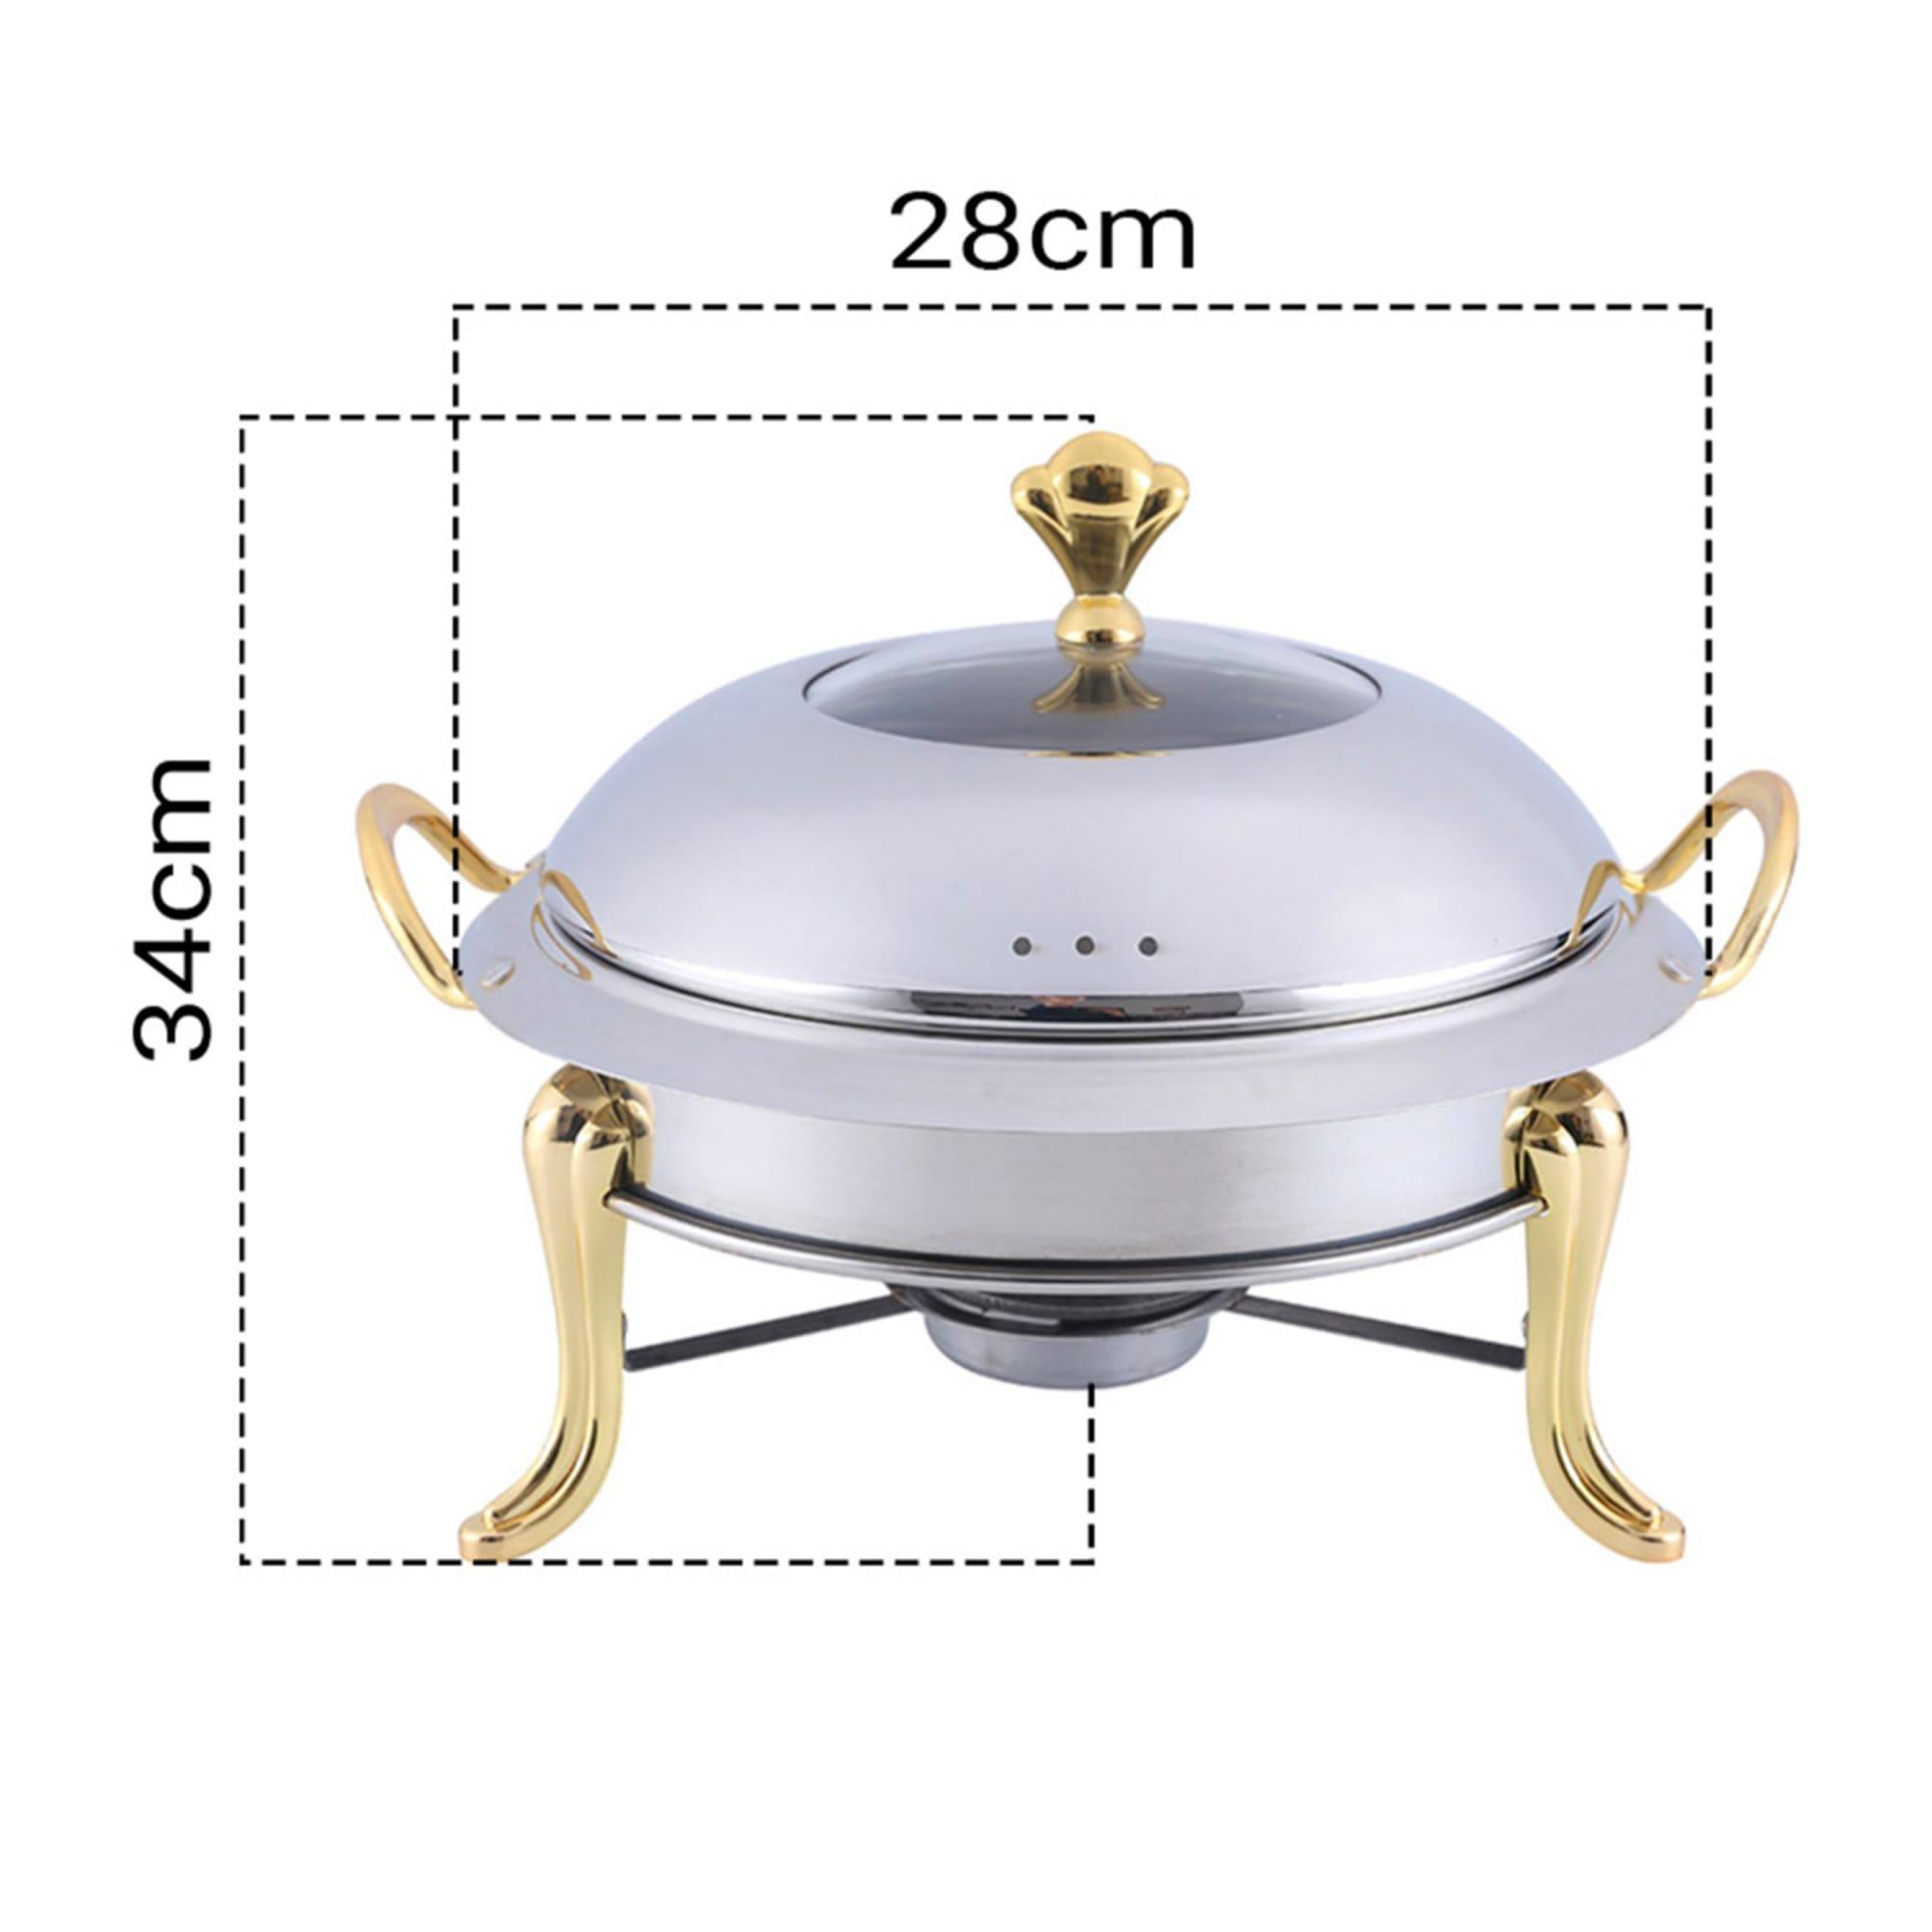 Soga Round Stainless Steel Chafing Dish with Glass Top Lid Set of 2 Gold Image 5